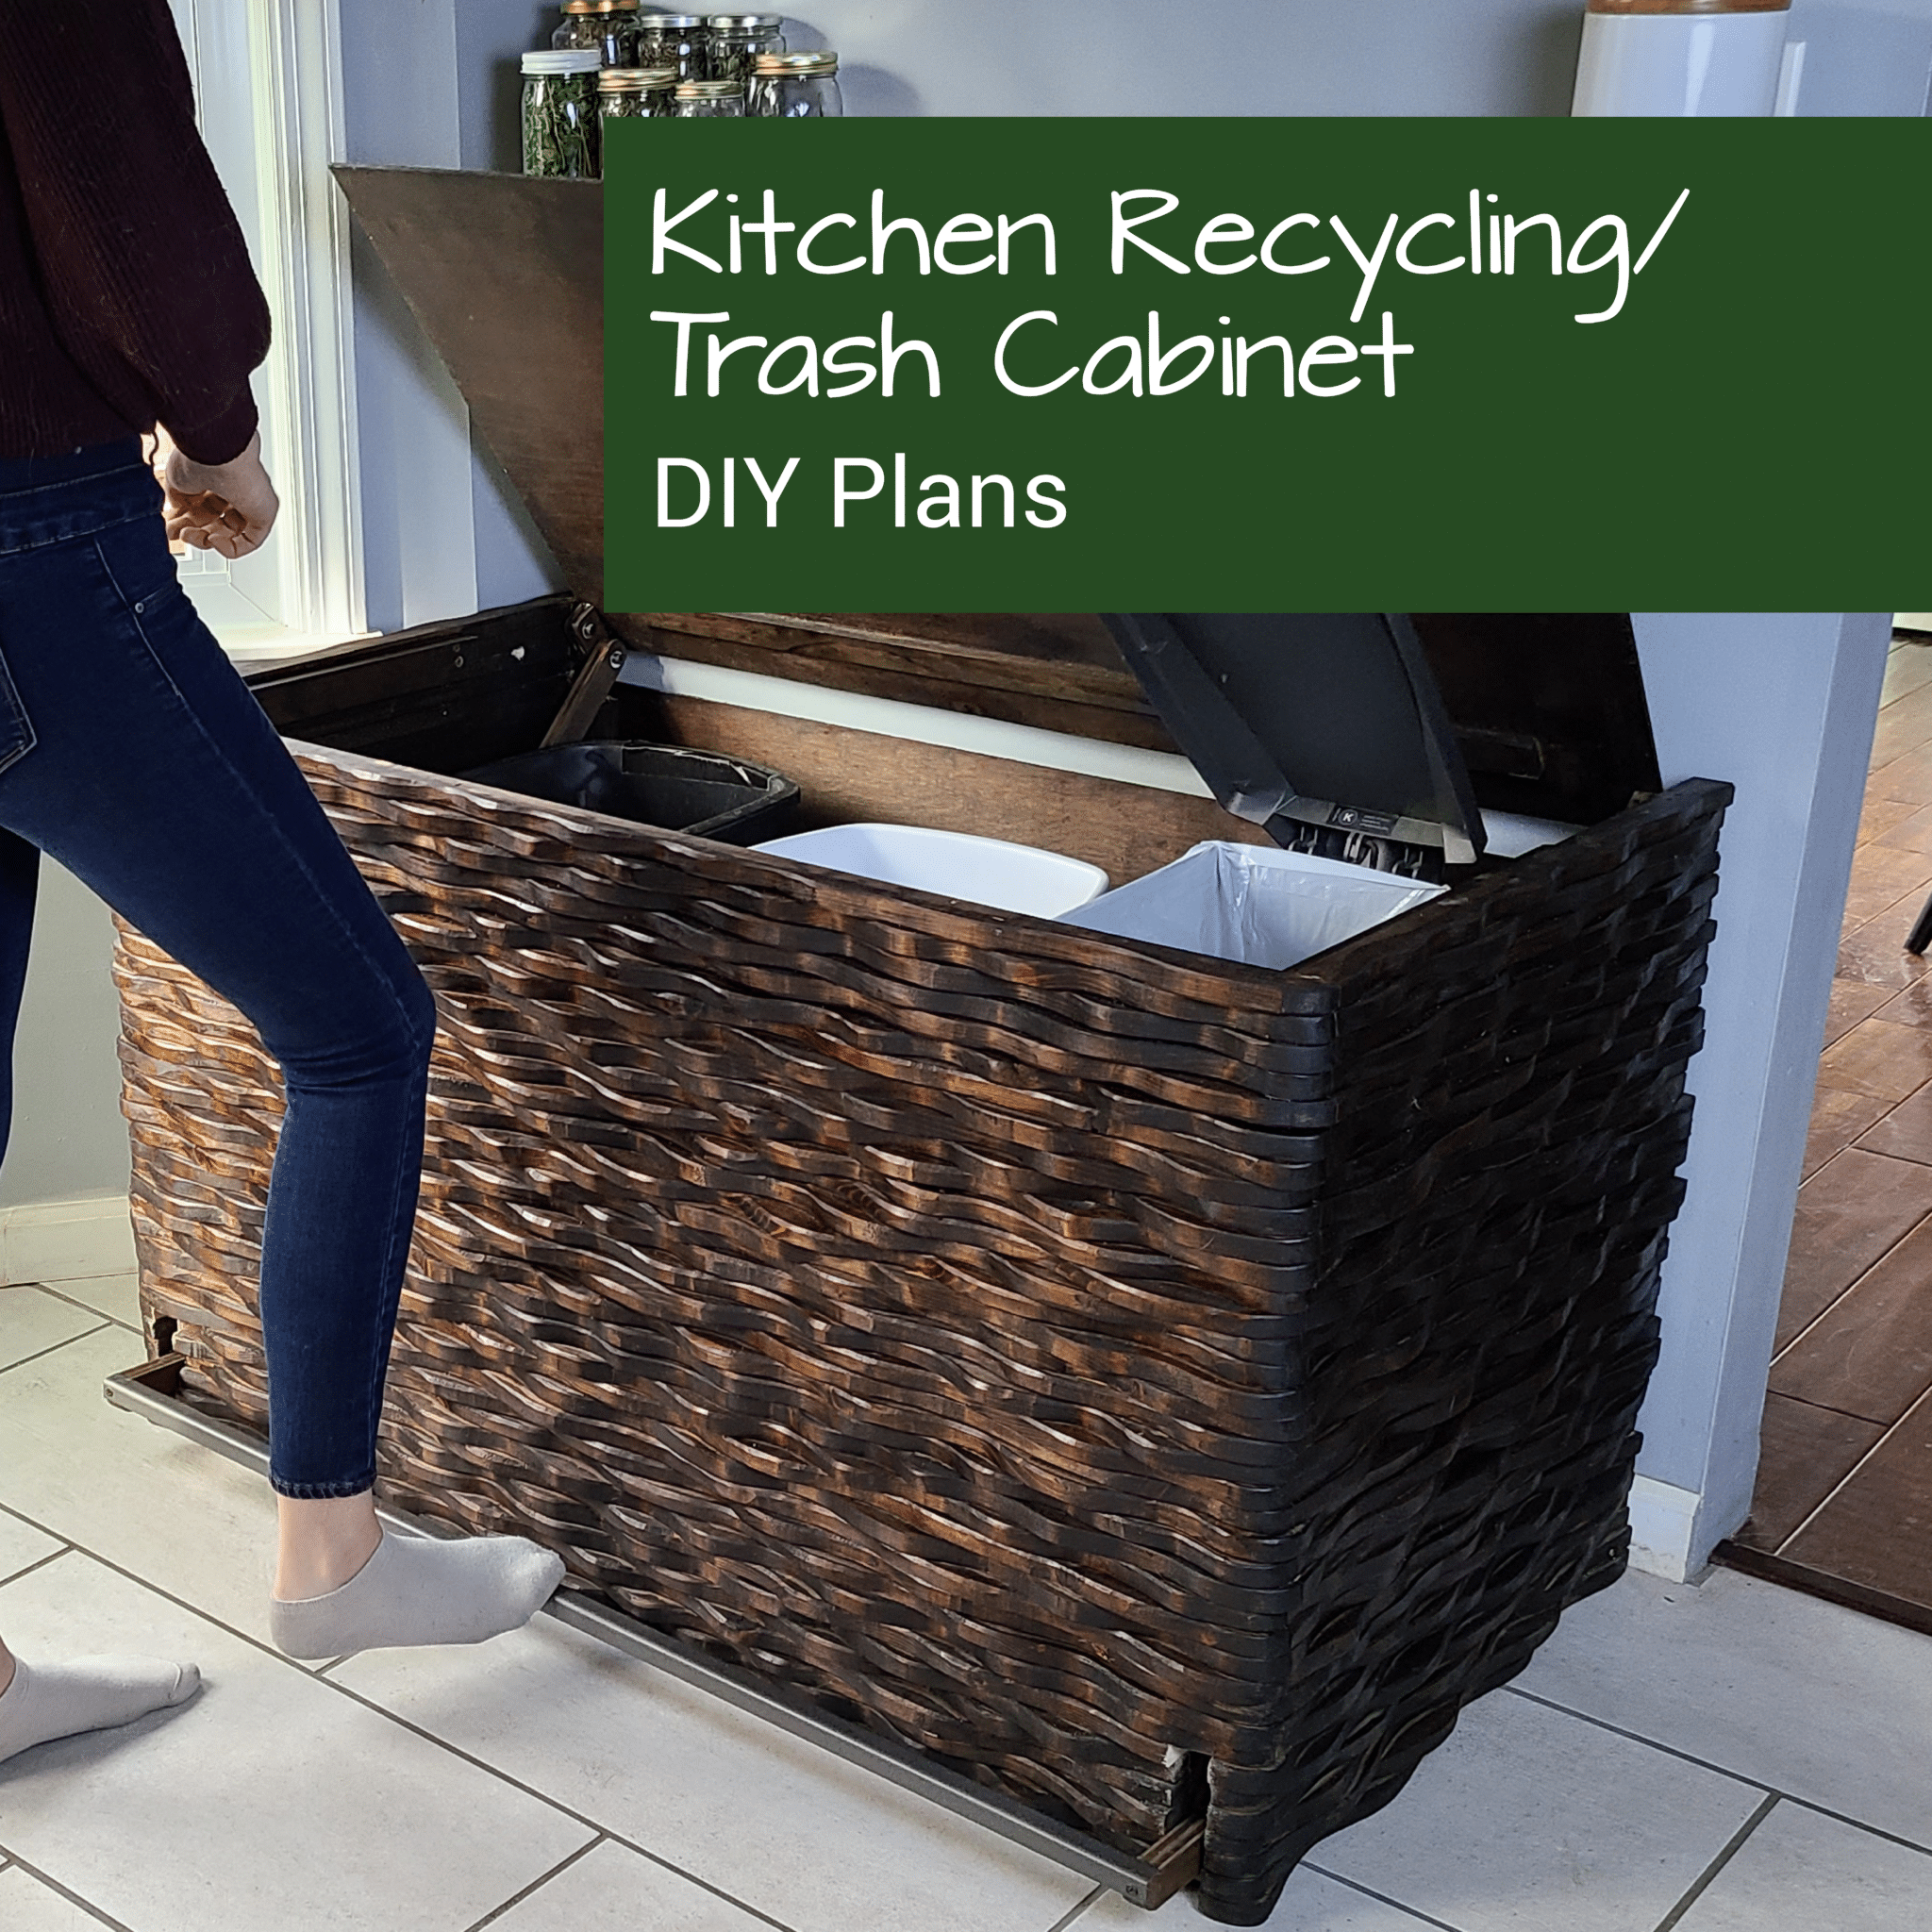 Kitchen Recycling Trash Cabinet Plans